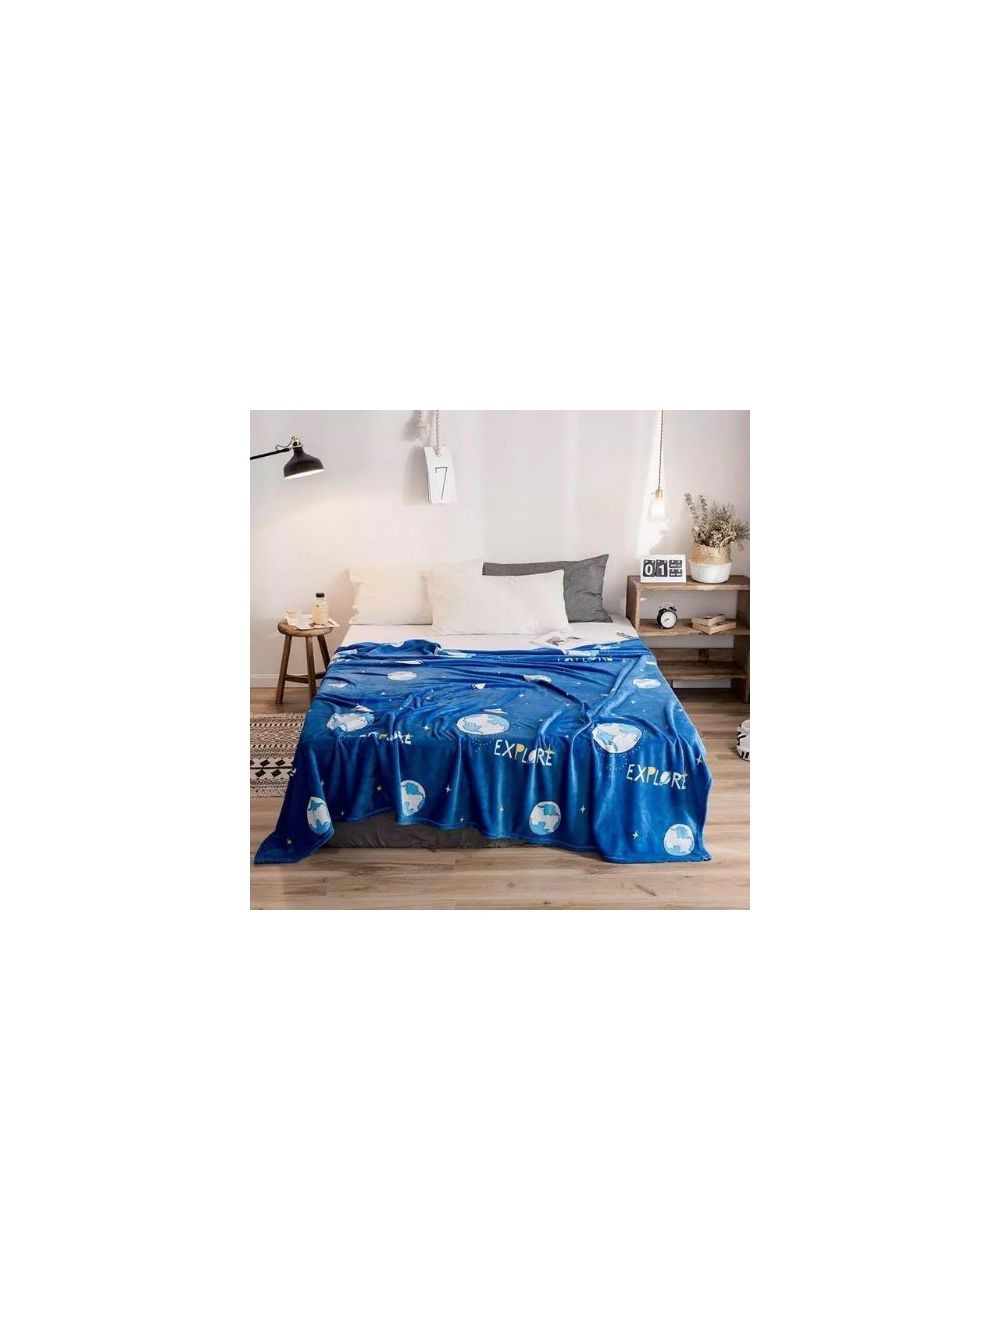 DEALS FOR LESS - Soft Fleece Blanket, Blue With Earth Design.-bhz32-04